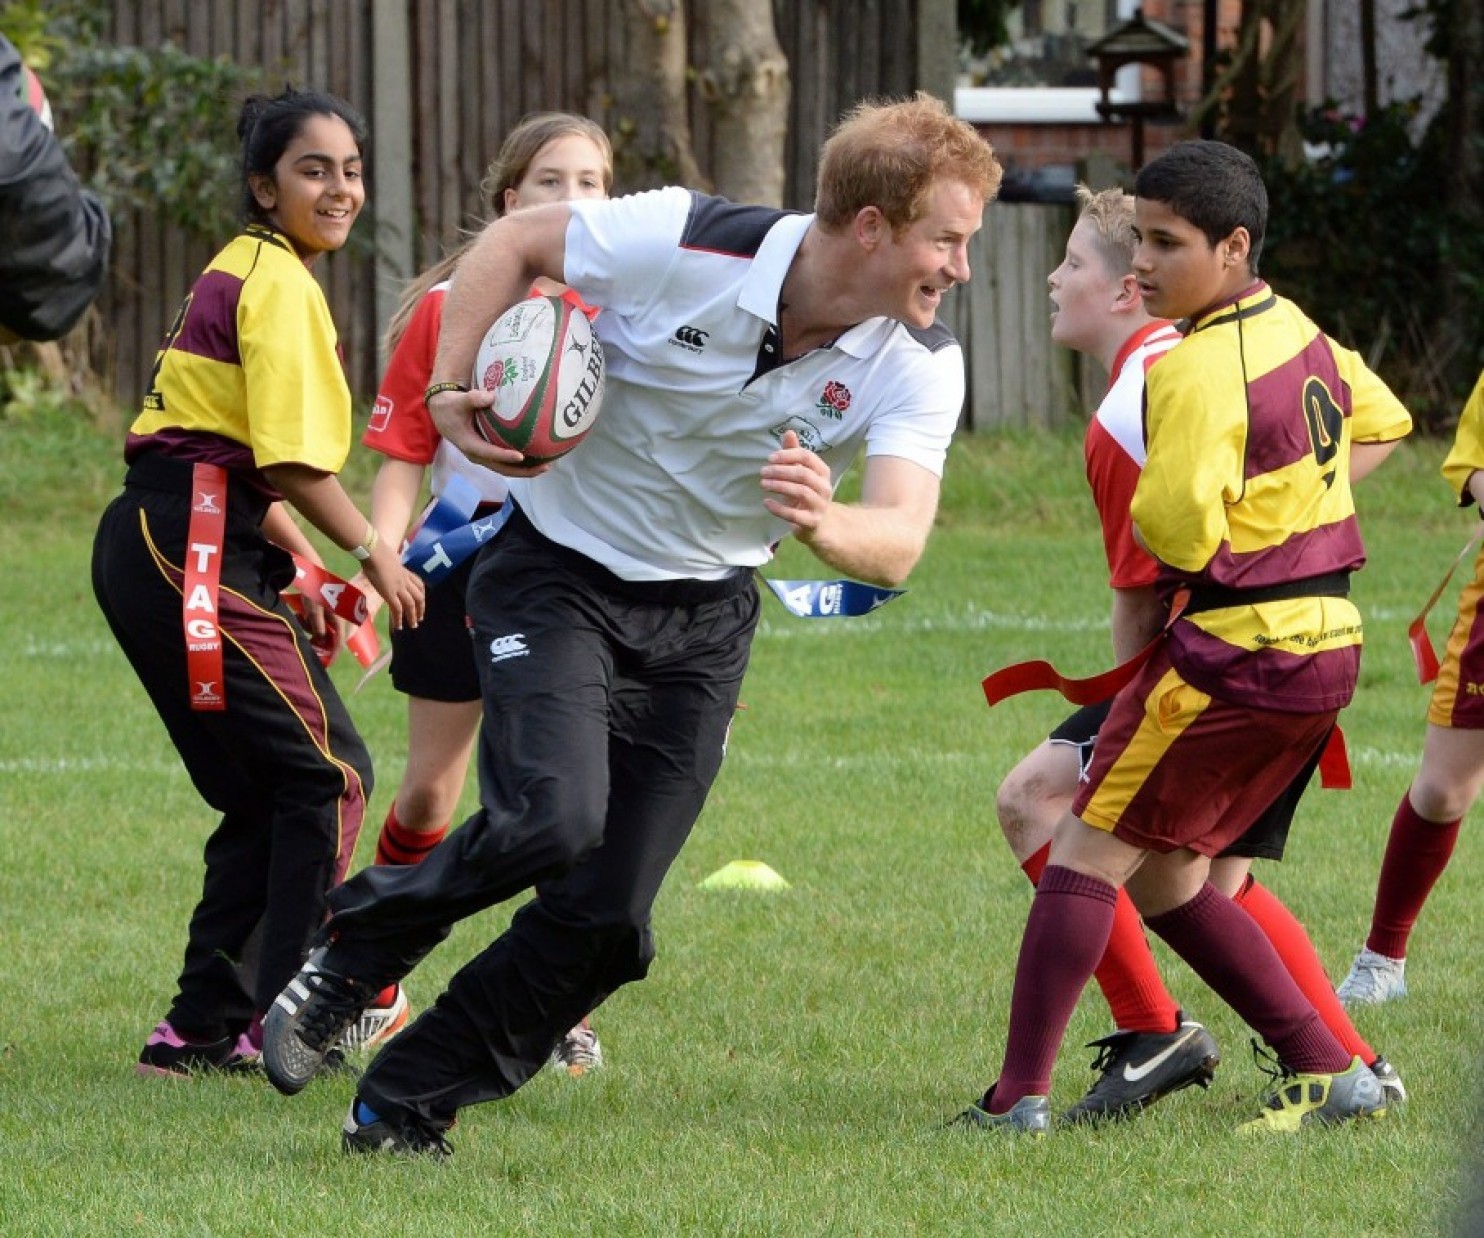 The premise of the All Schools project, which was created to support England’s upcoming hosting duties for the 2015 Rugby World Cup